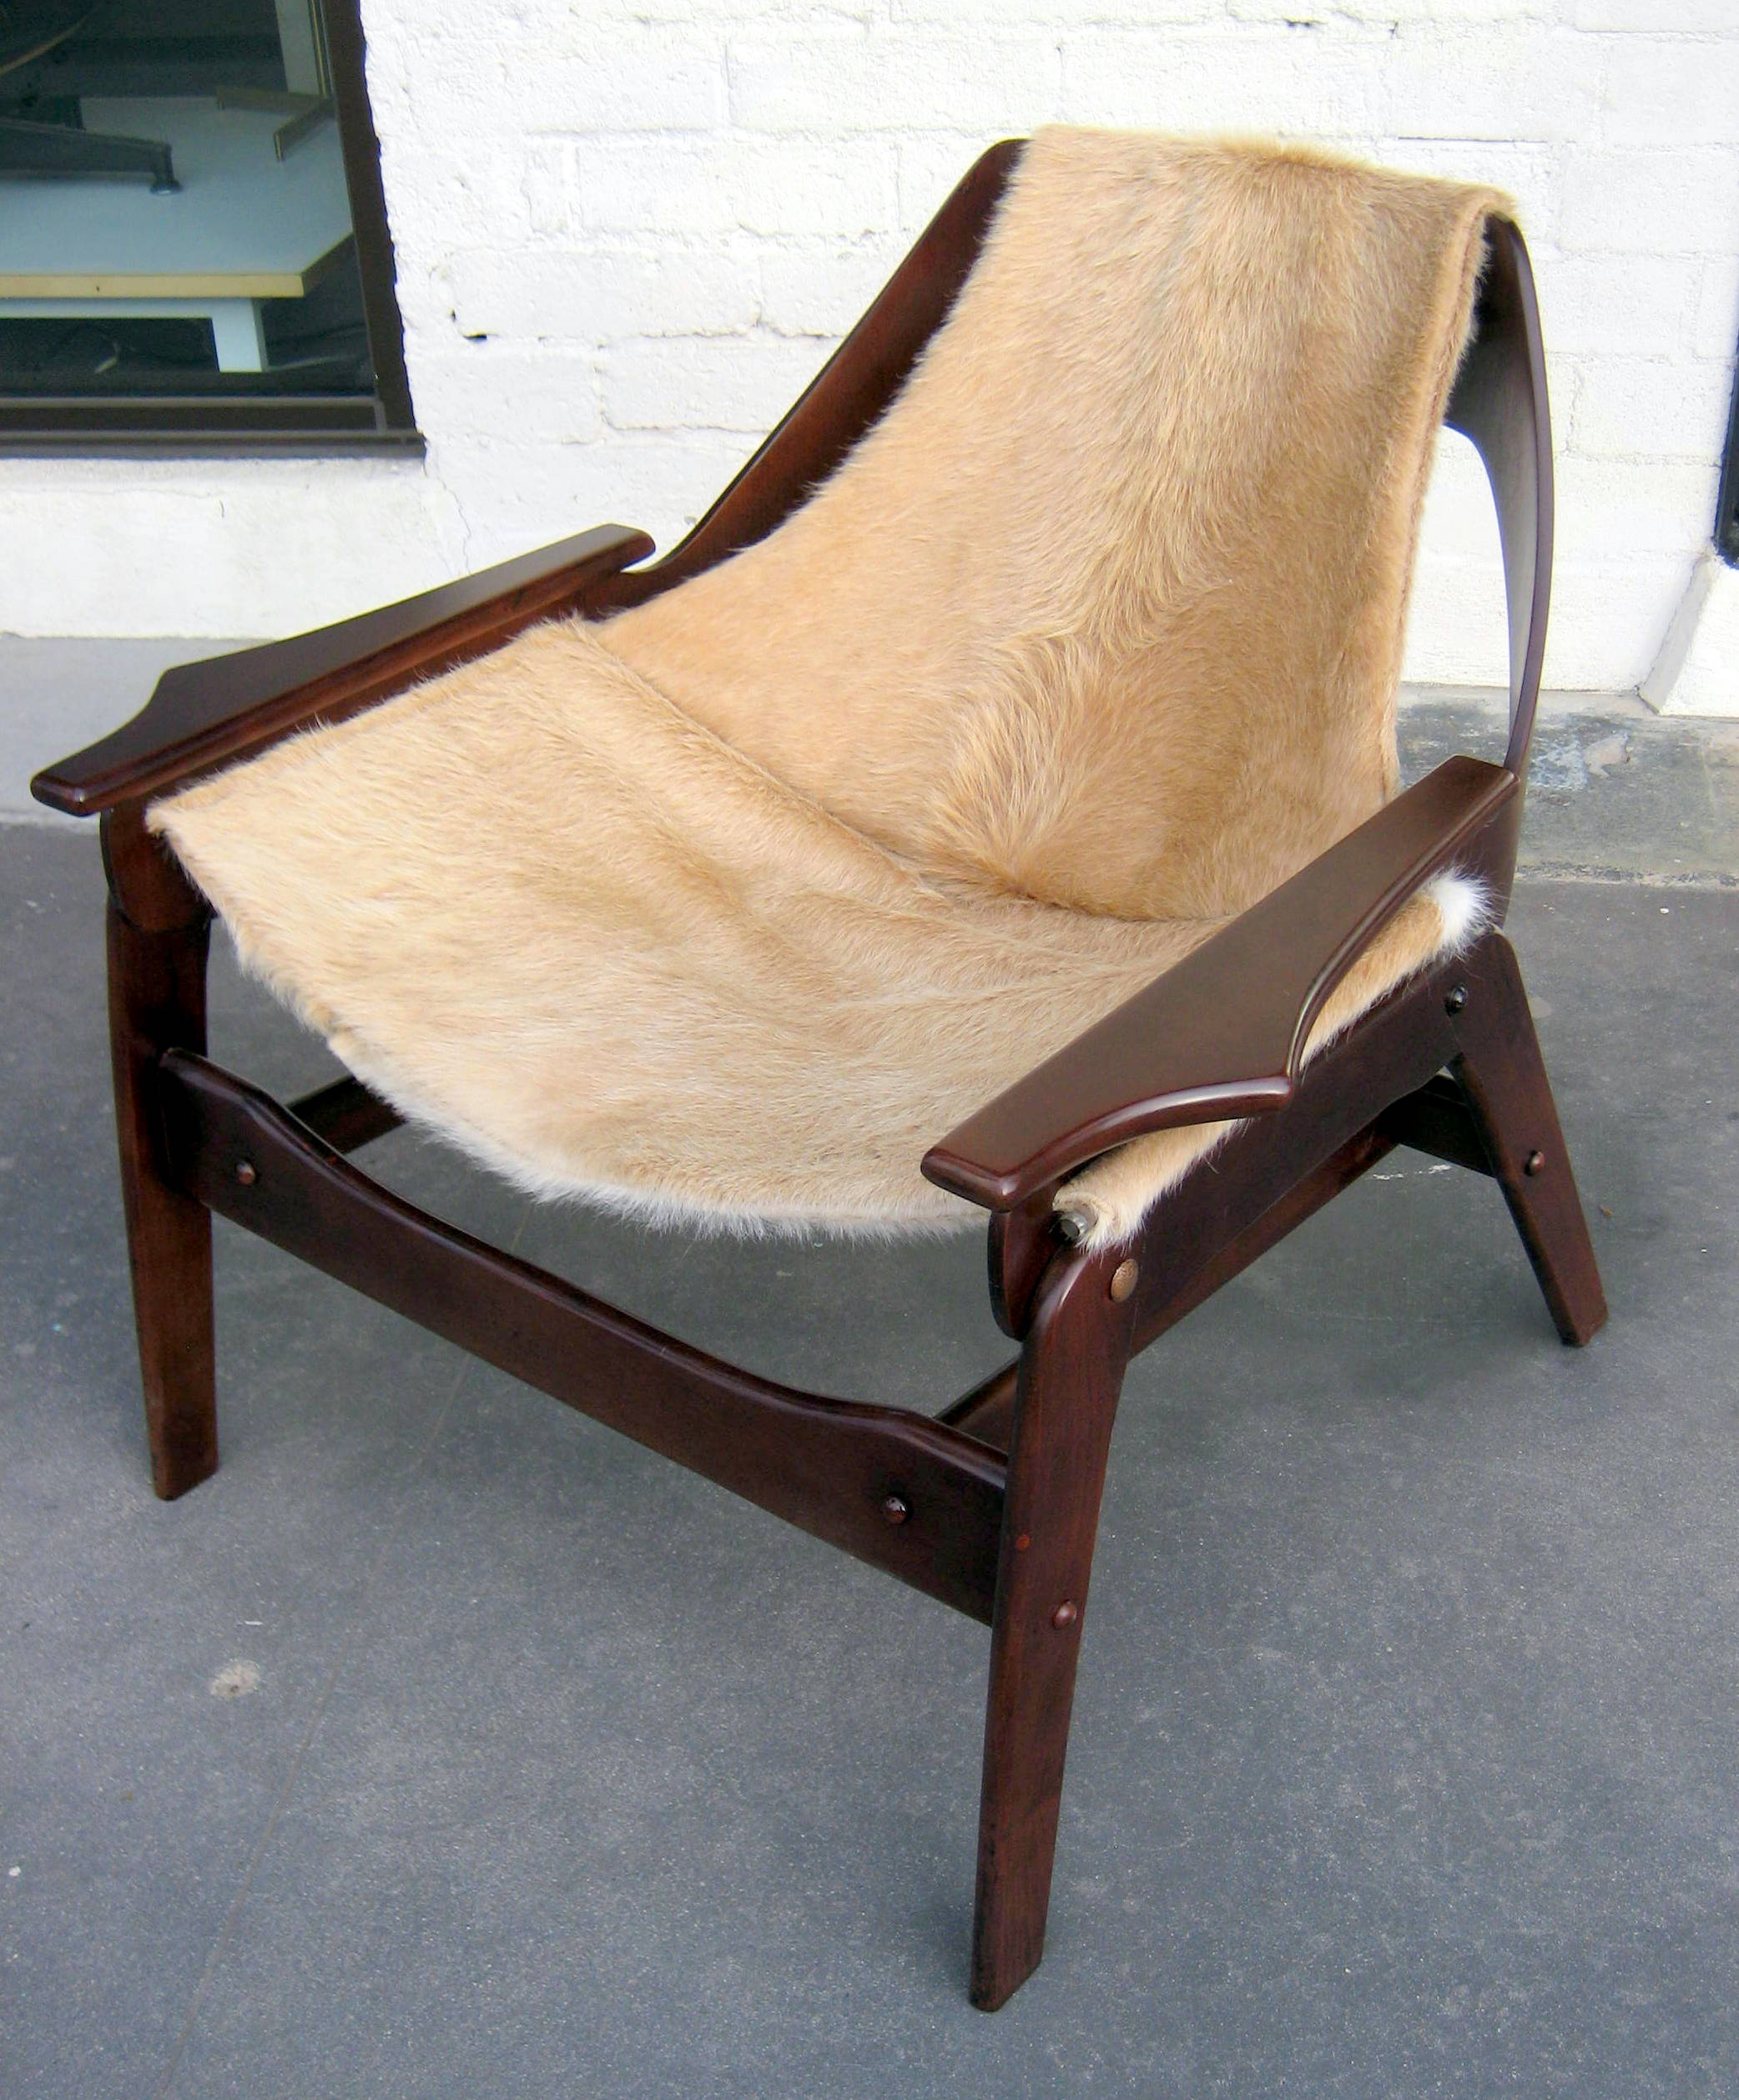 A stained walnut sling chair designed by Jerry Johnson in 1964